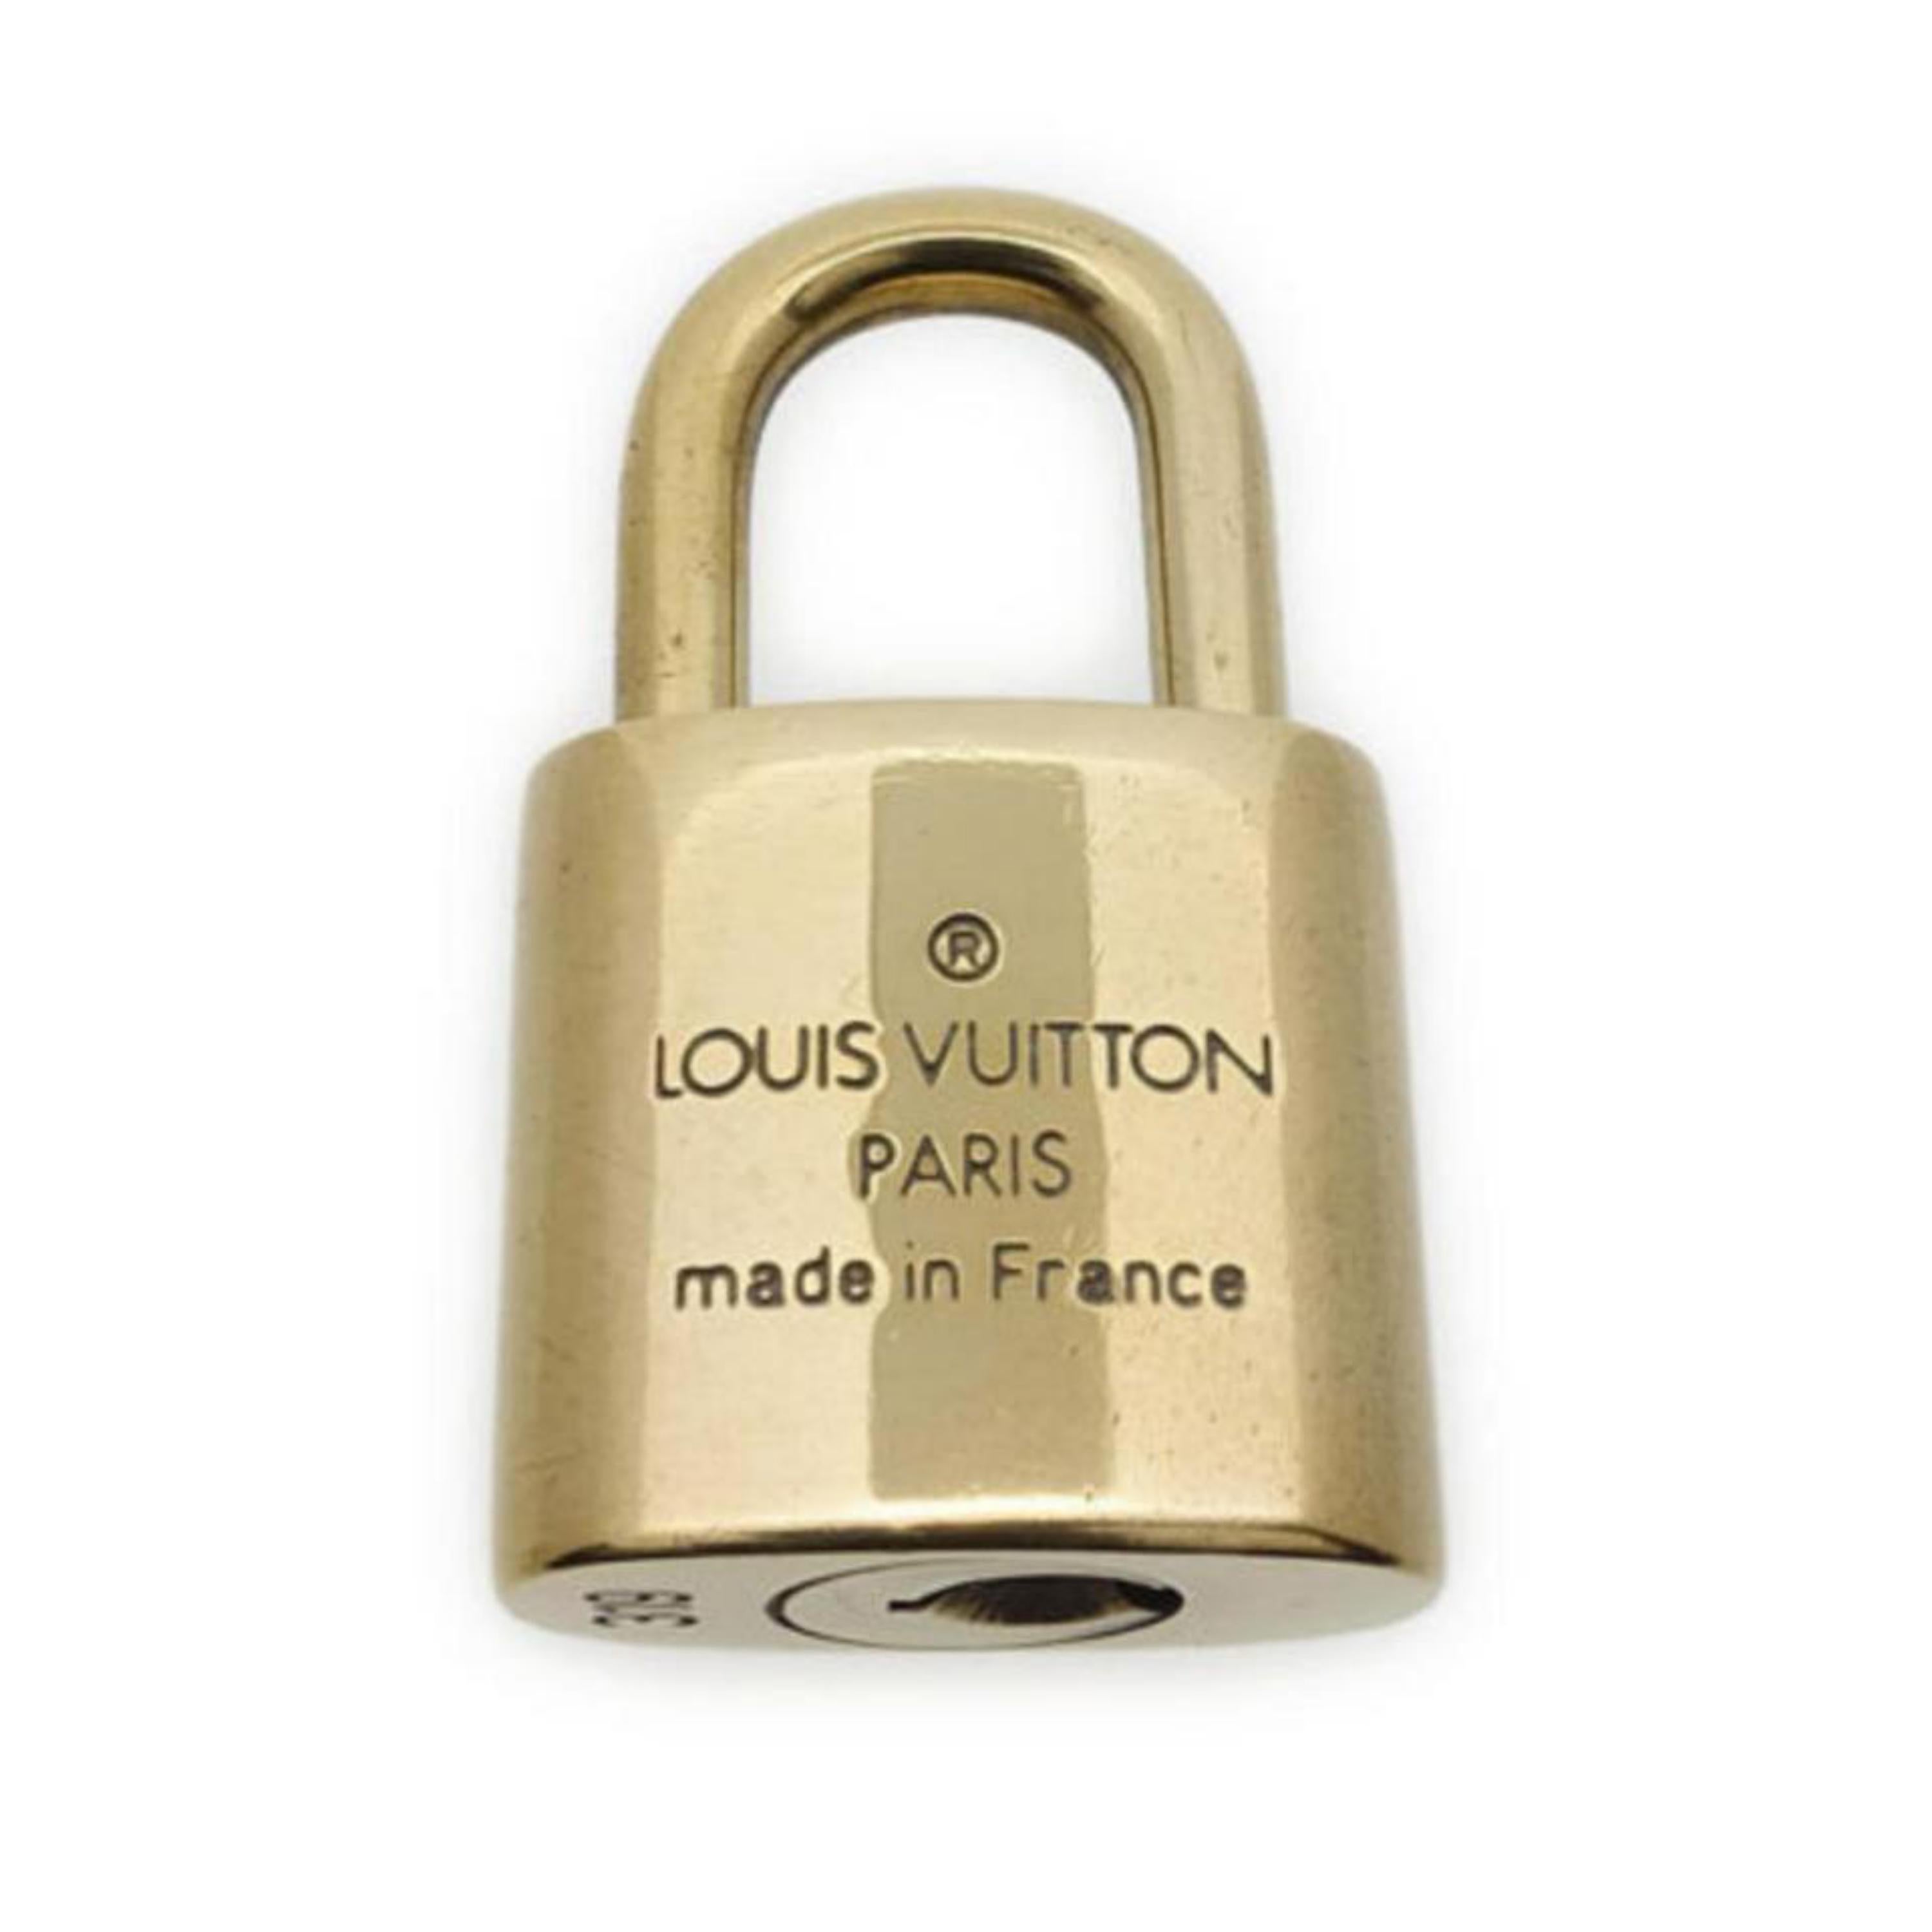 Louis Vuitton Gold Single Key Lock Pad Lock and Key 867586 In Fair Condition For Sale In Forest Hills, NY